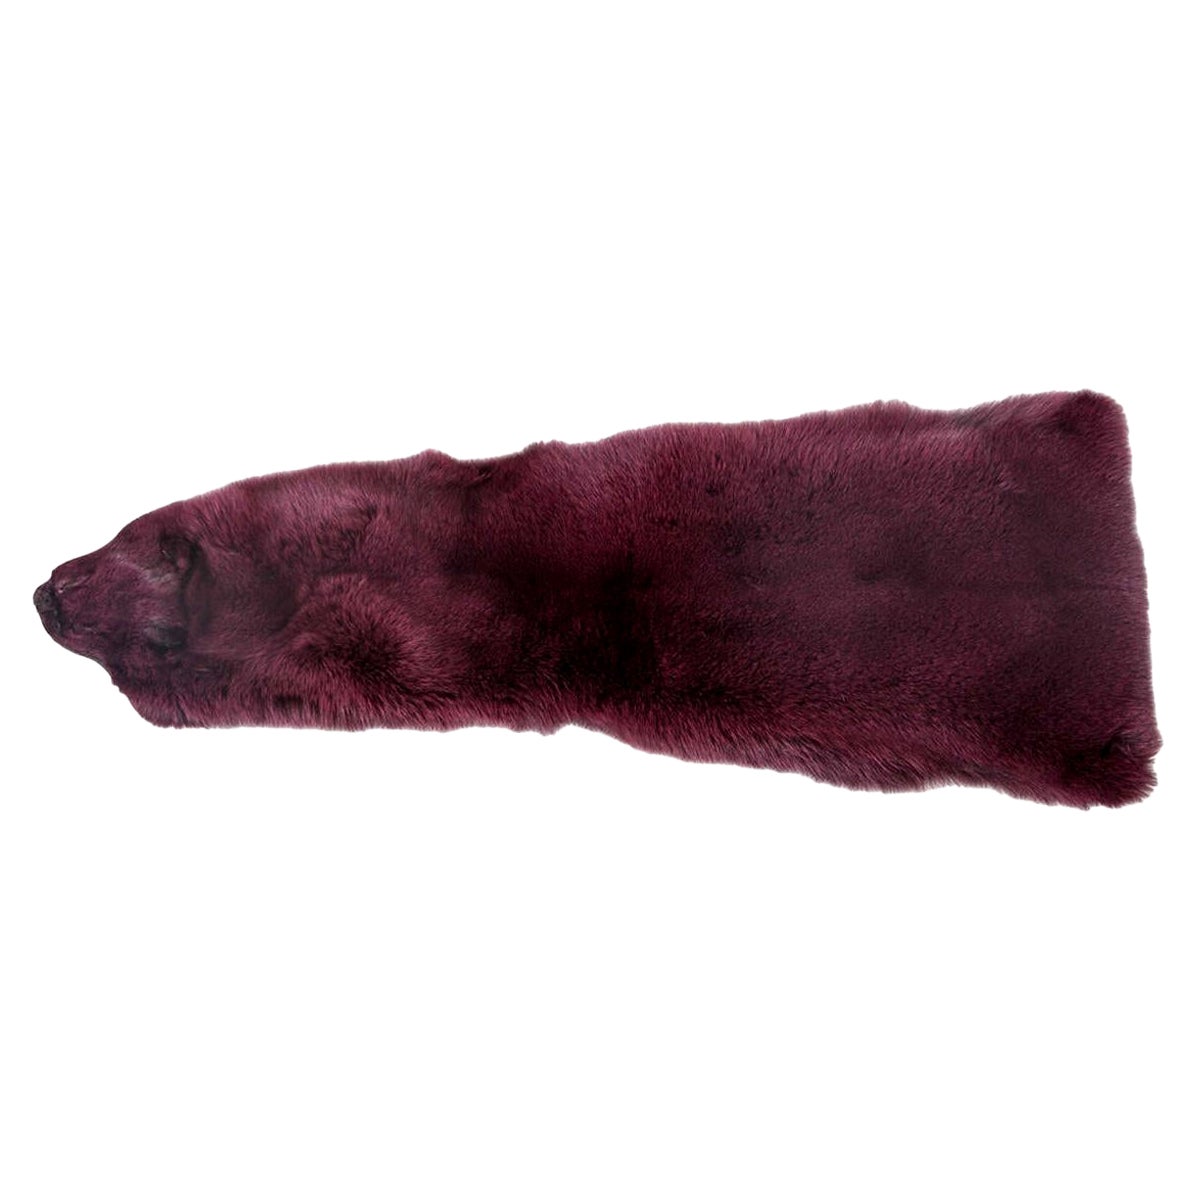 Fox Wrap, by Area ID, Burgundy Color, Fur Stole, Full Skin, New Item, in Stock